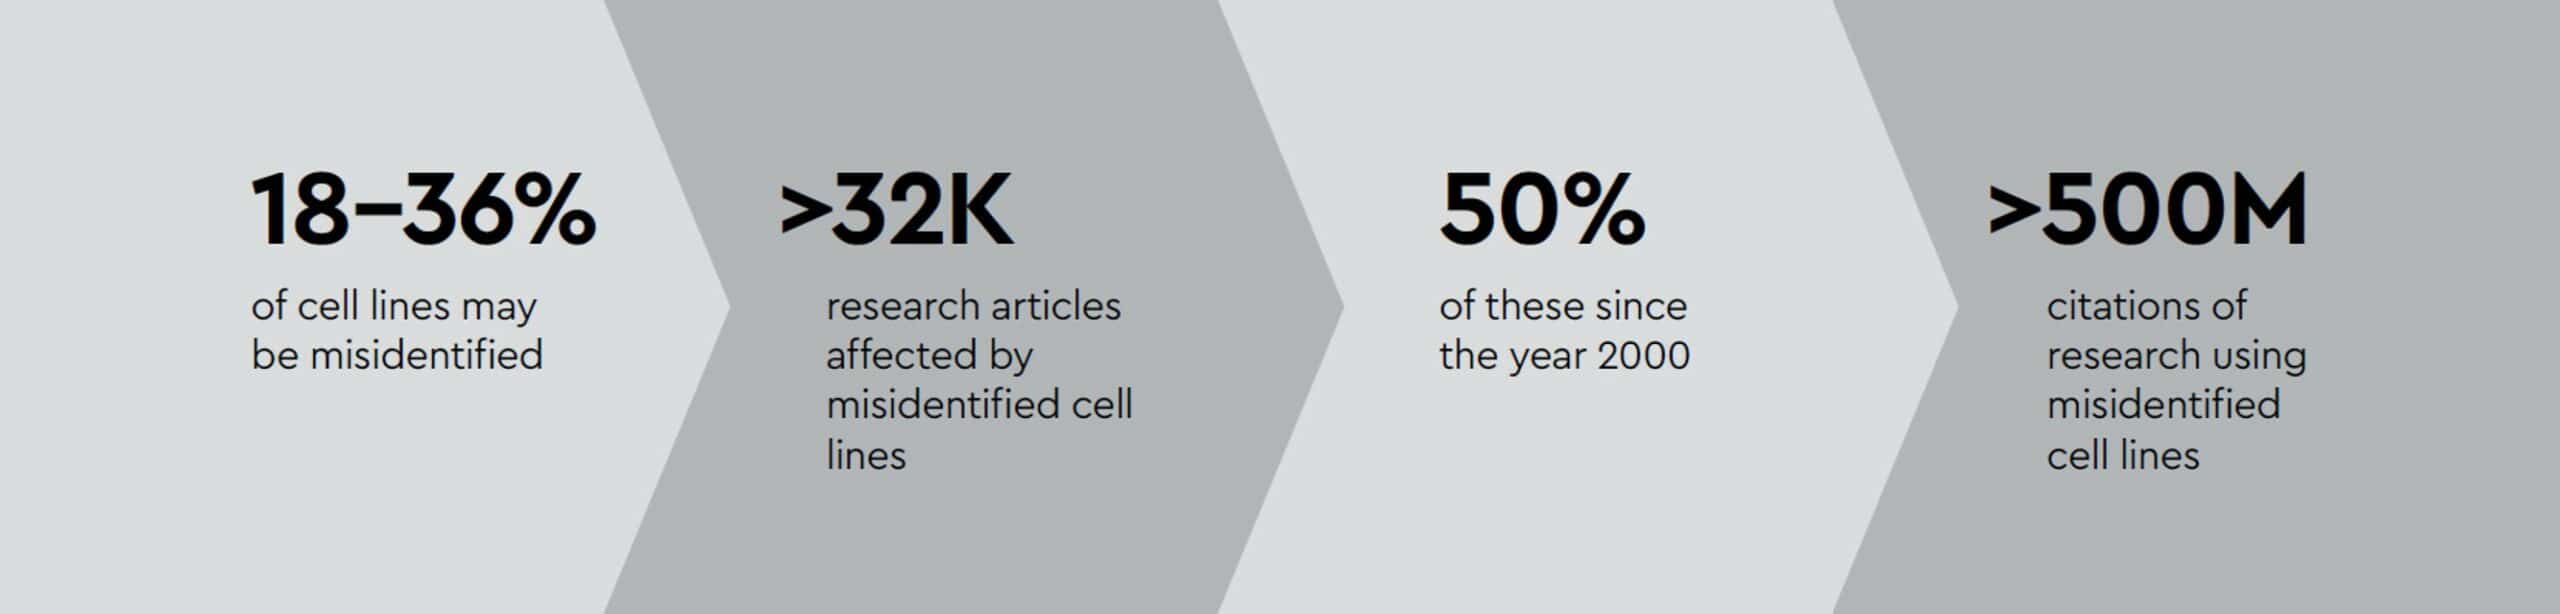 the use of cell lines in scientific research - facts and figures